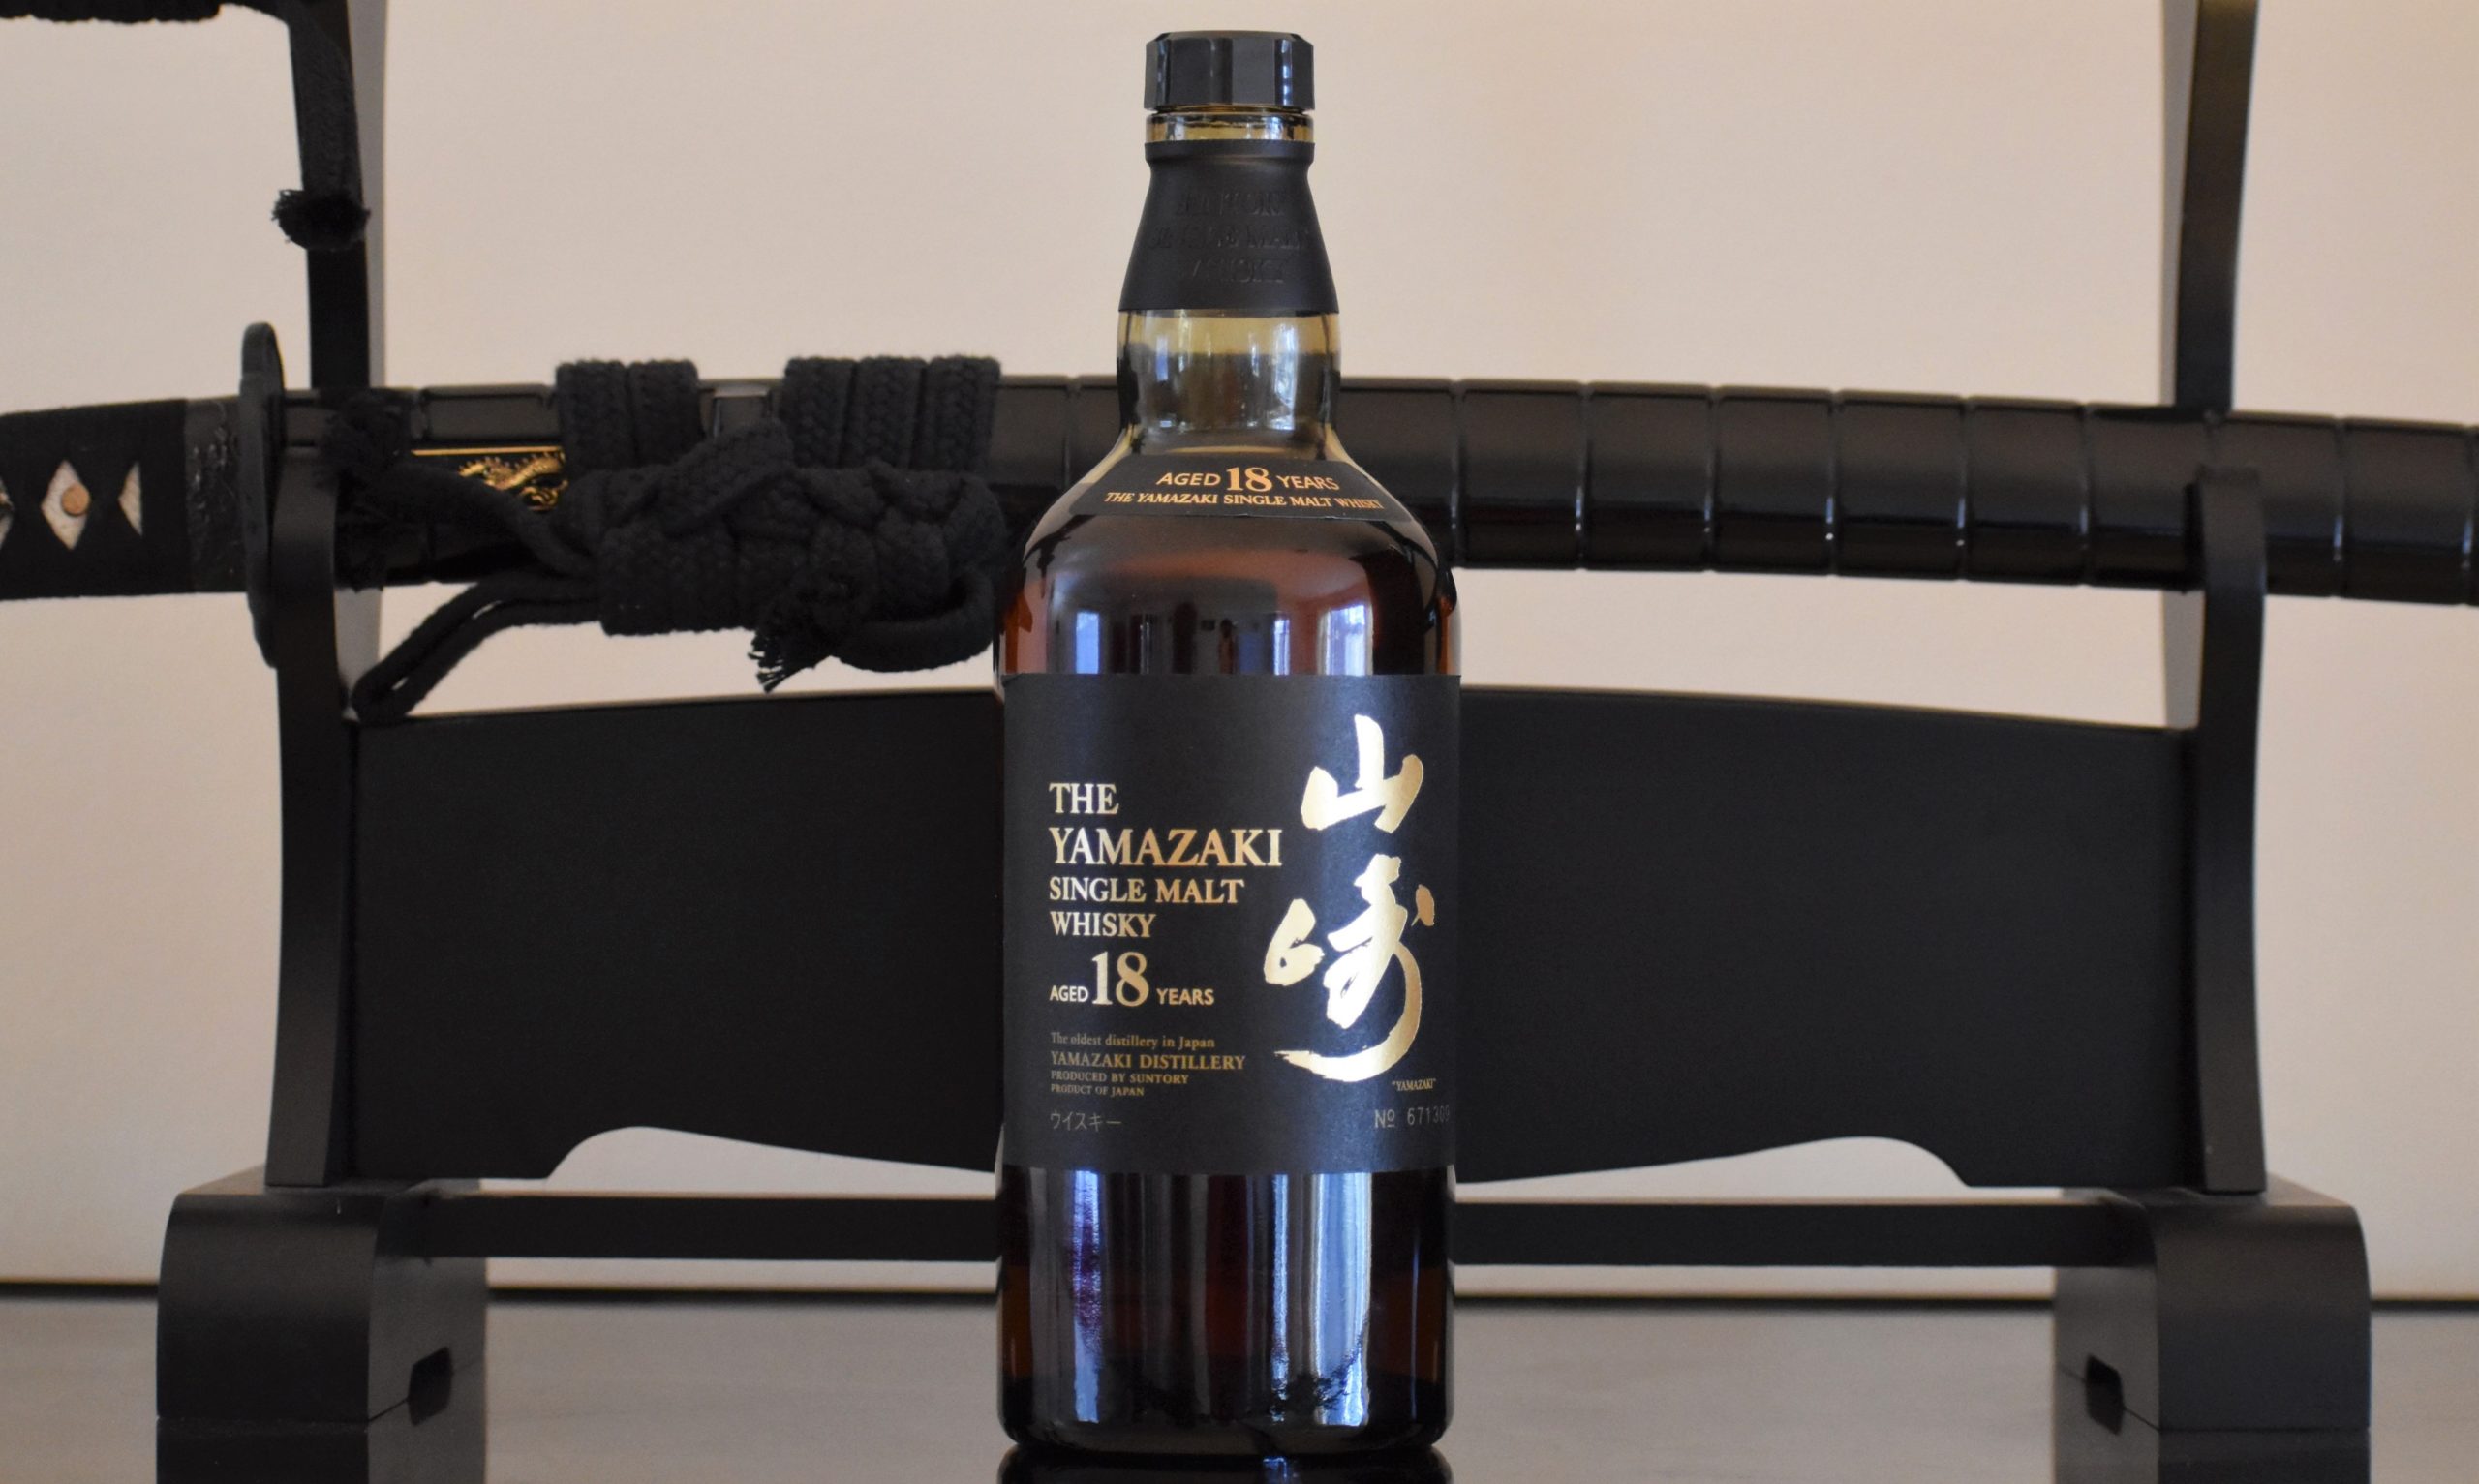 Yamazaki 18yo, a very refined whisky by the 1st whisky distillery created in Japan